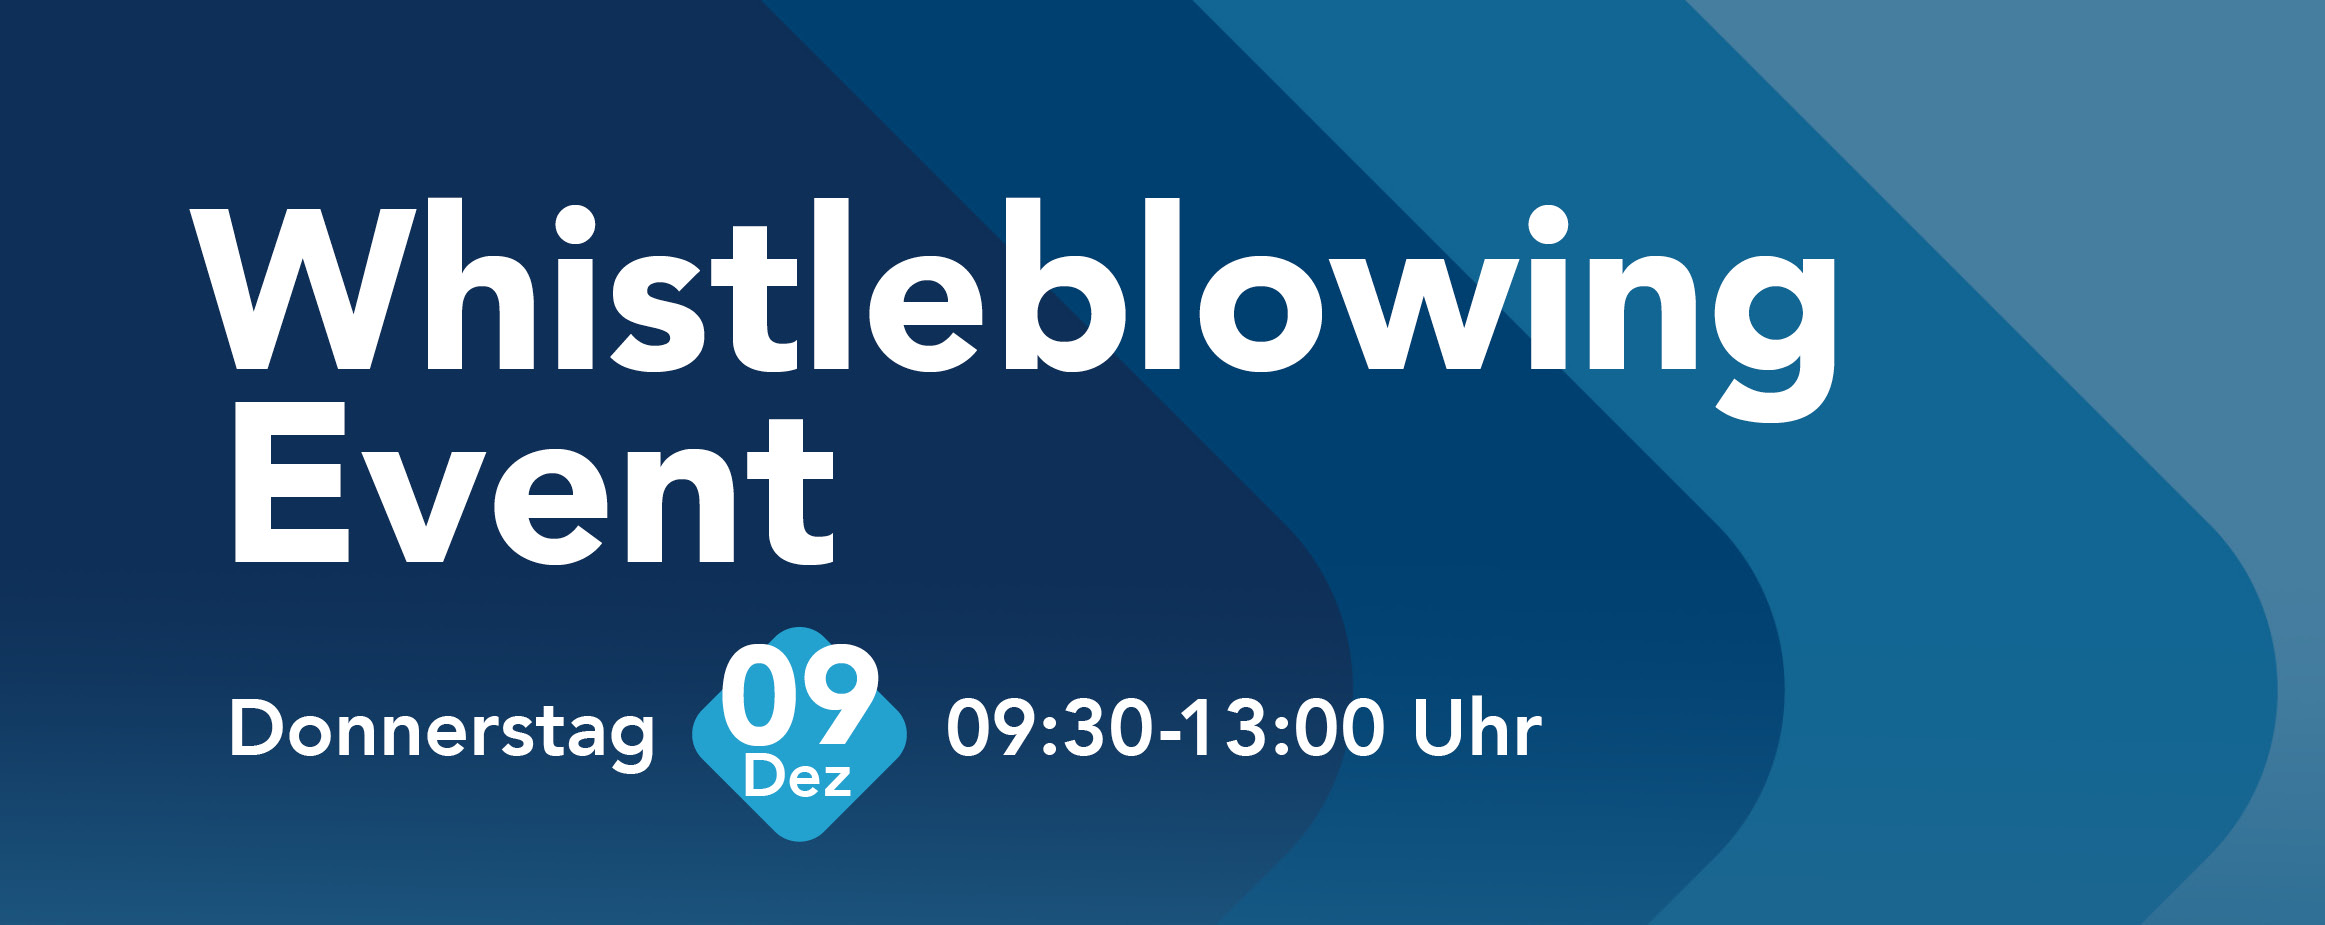 Whistleblowing-Event_Banner_Landing-Page